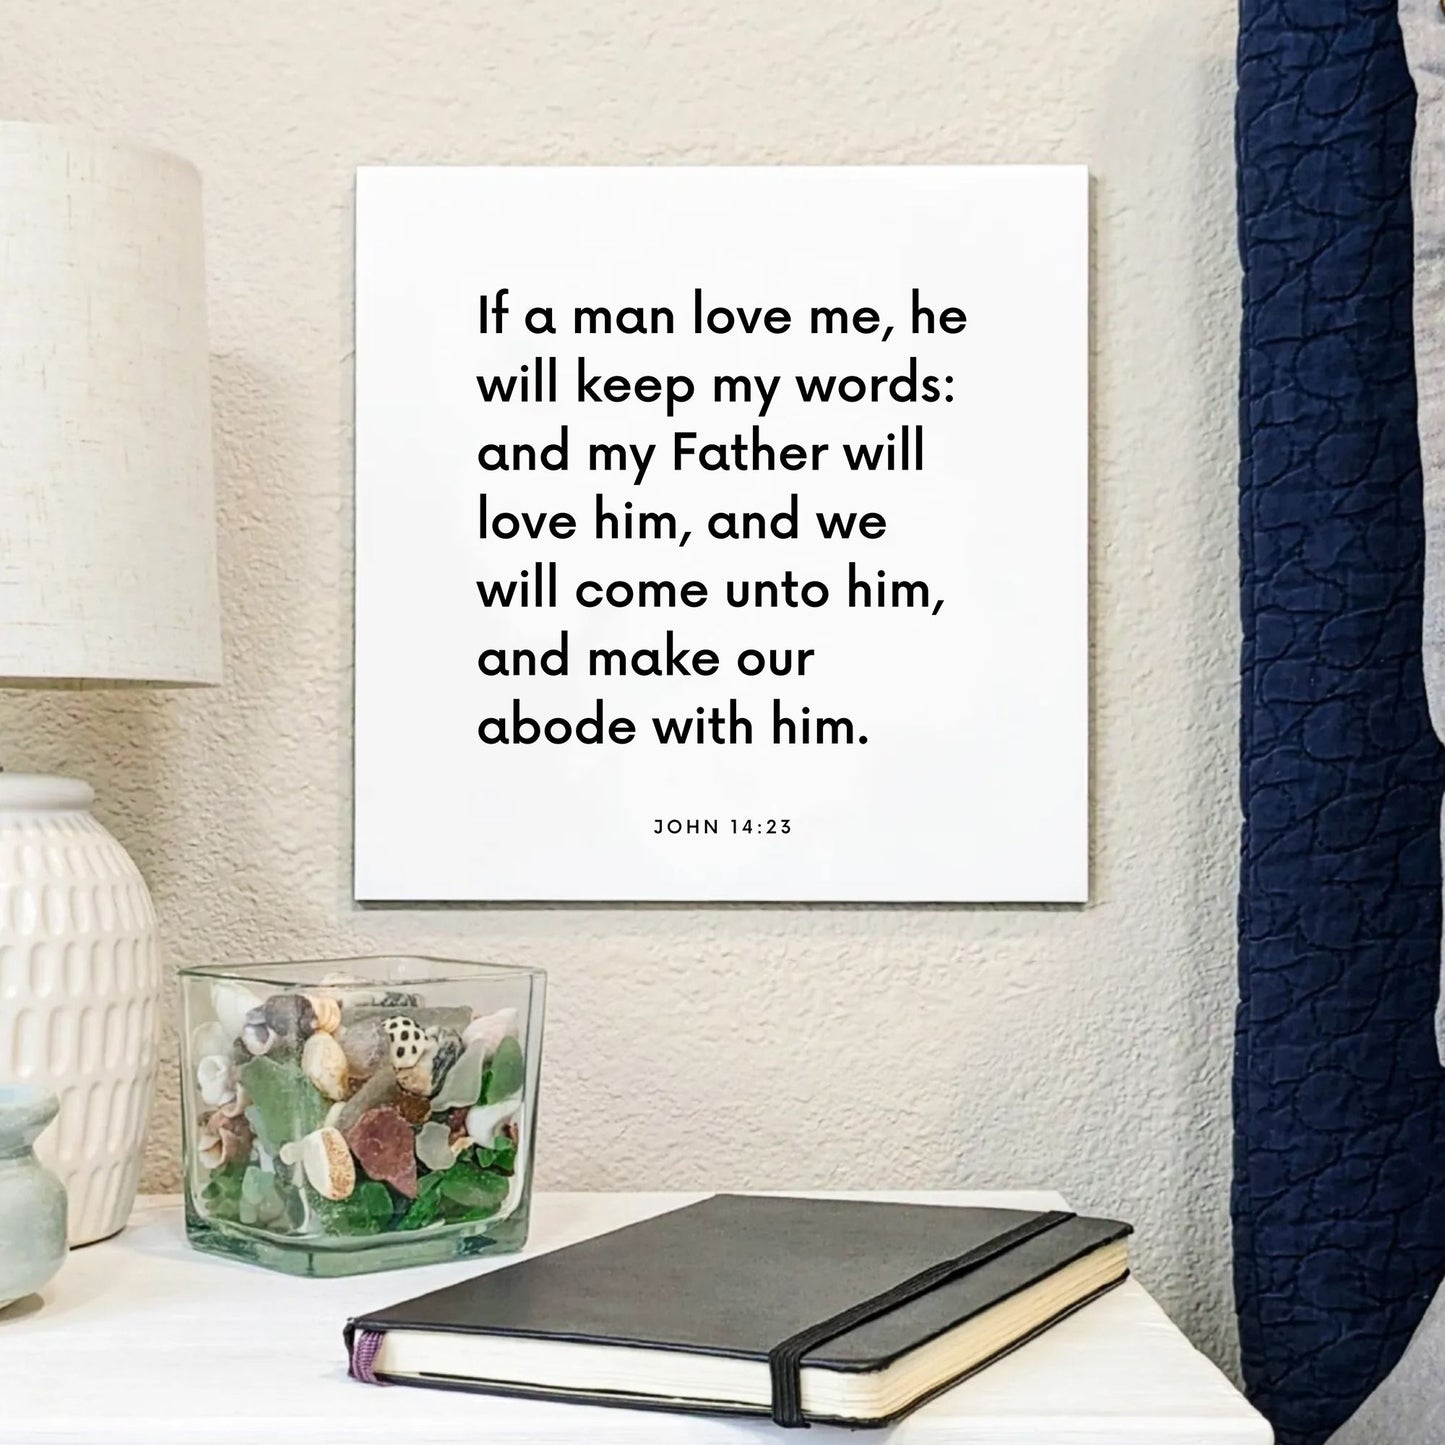 Bedside mouting of the scripture tile for John 14:23 - "If a man love me, he will keep my words"